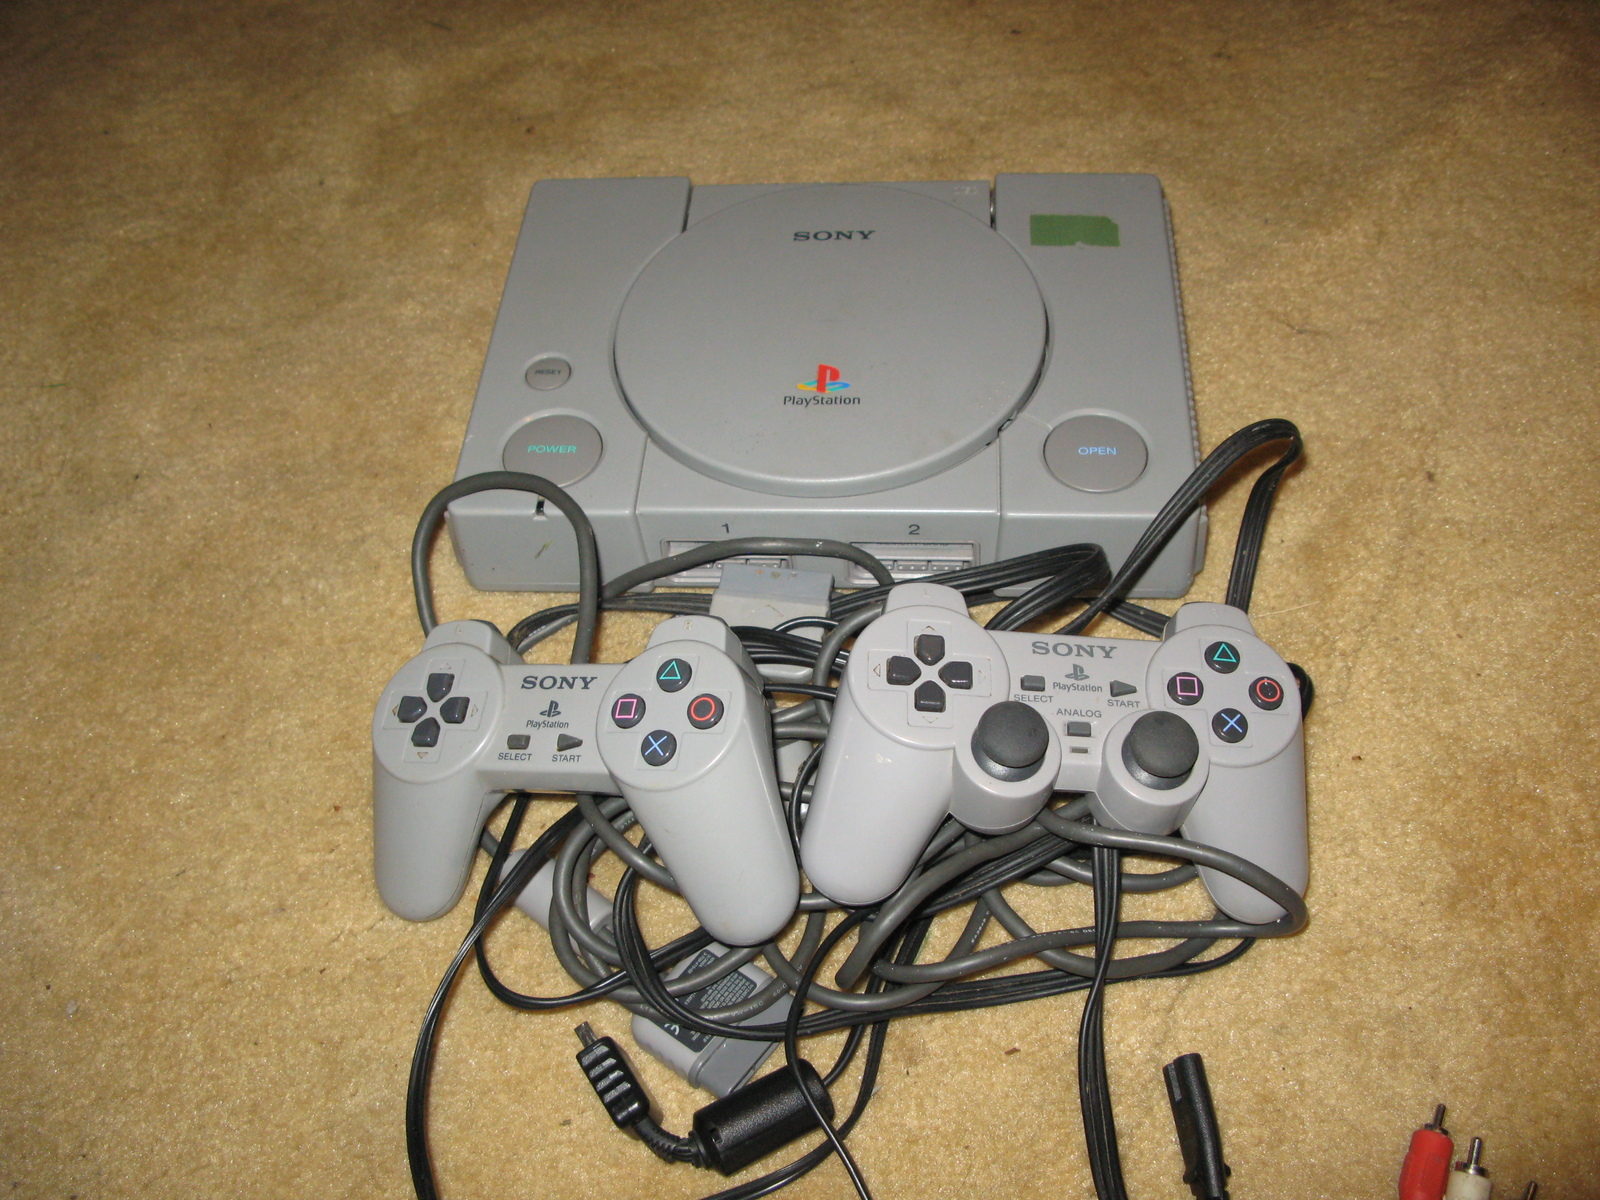 Original Gray Playstation Game Console and Controllers - $100.00